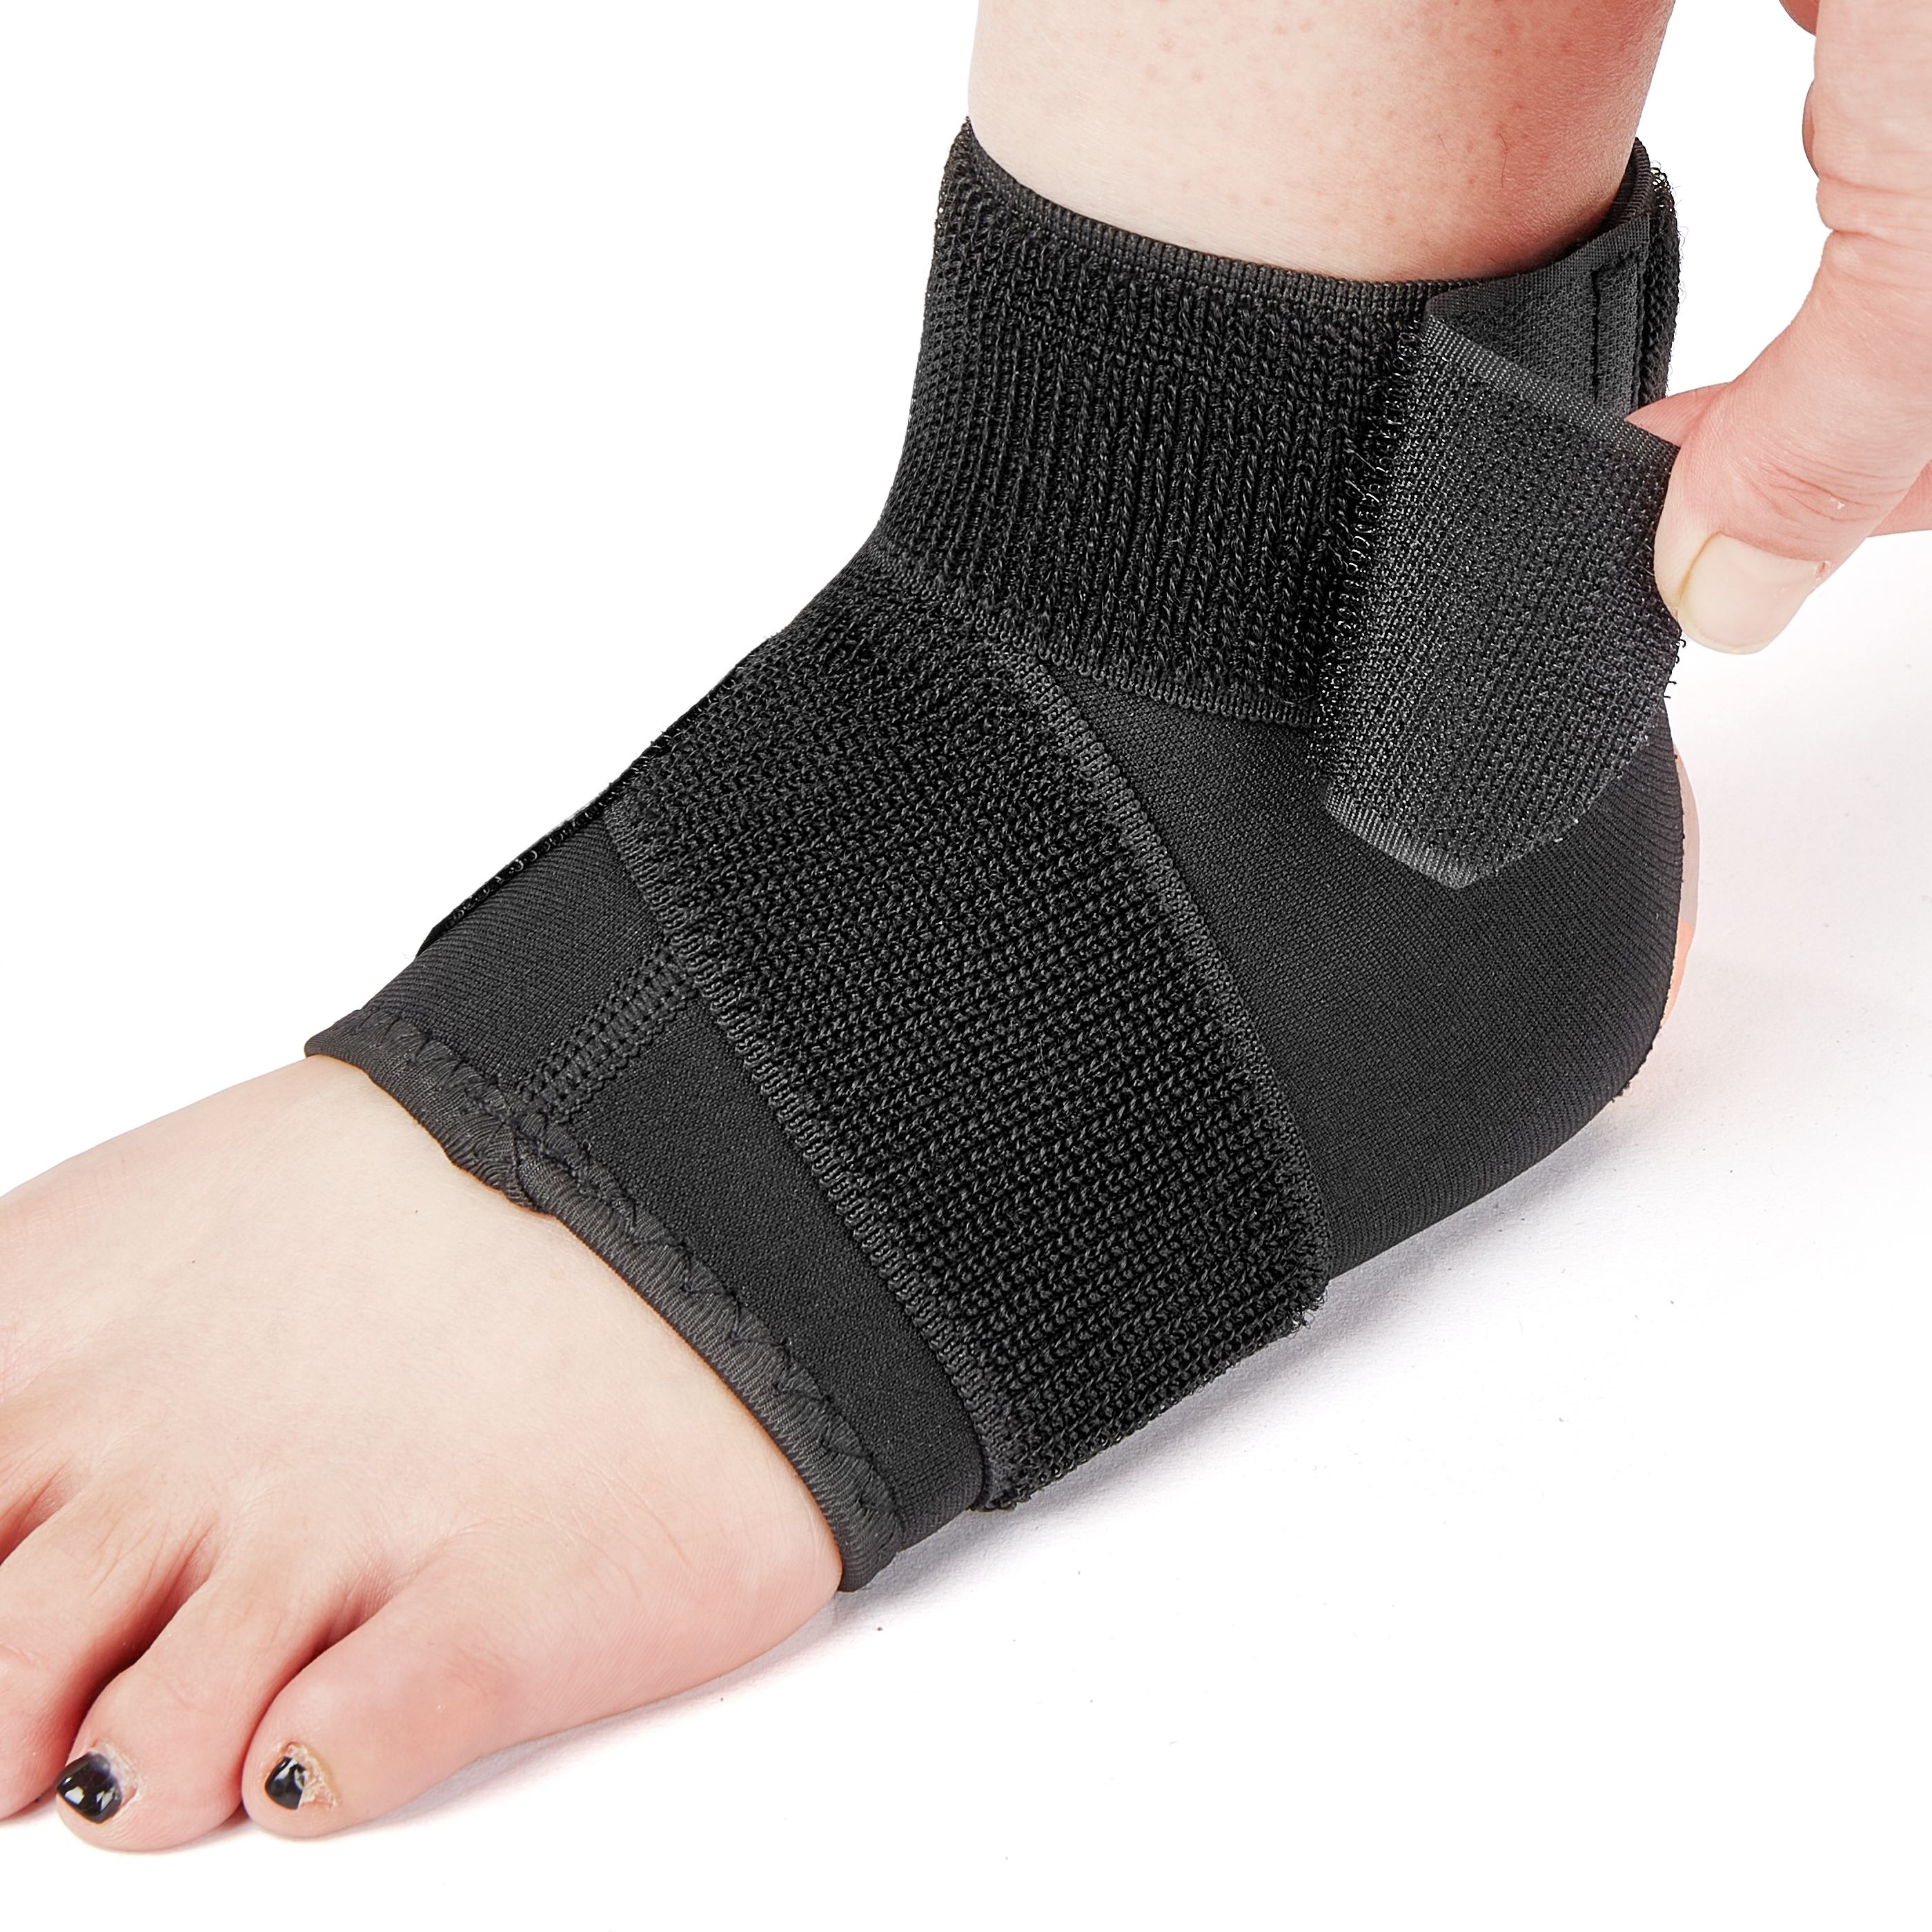 I-Ankle Guard-06